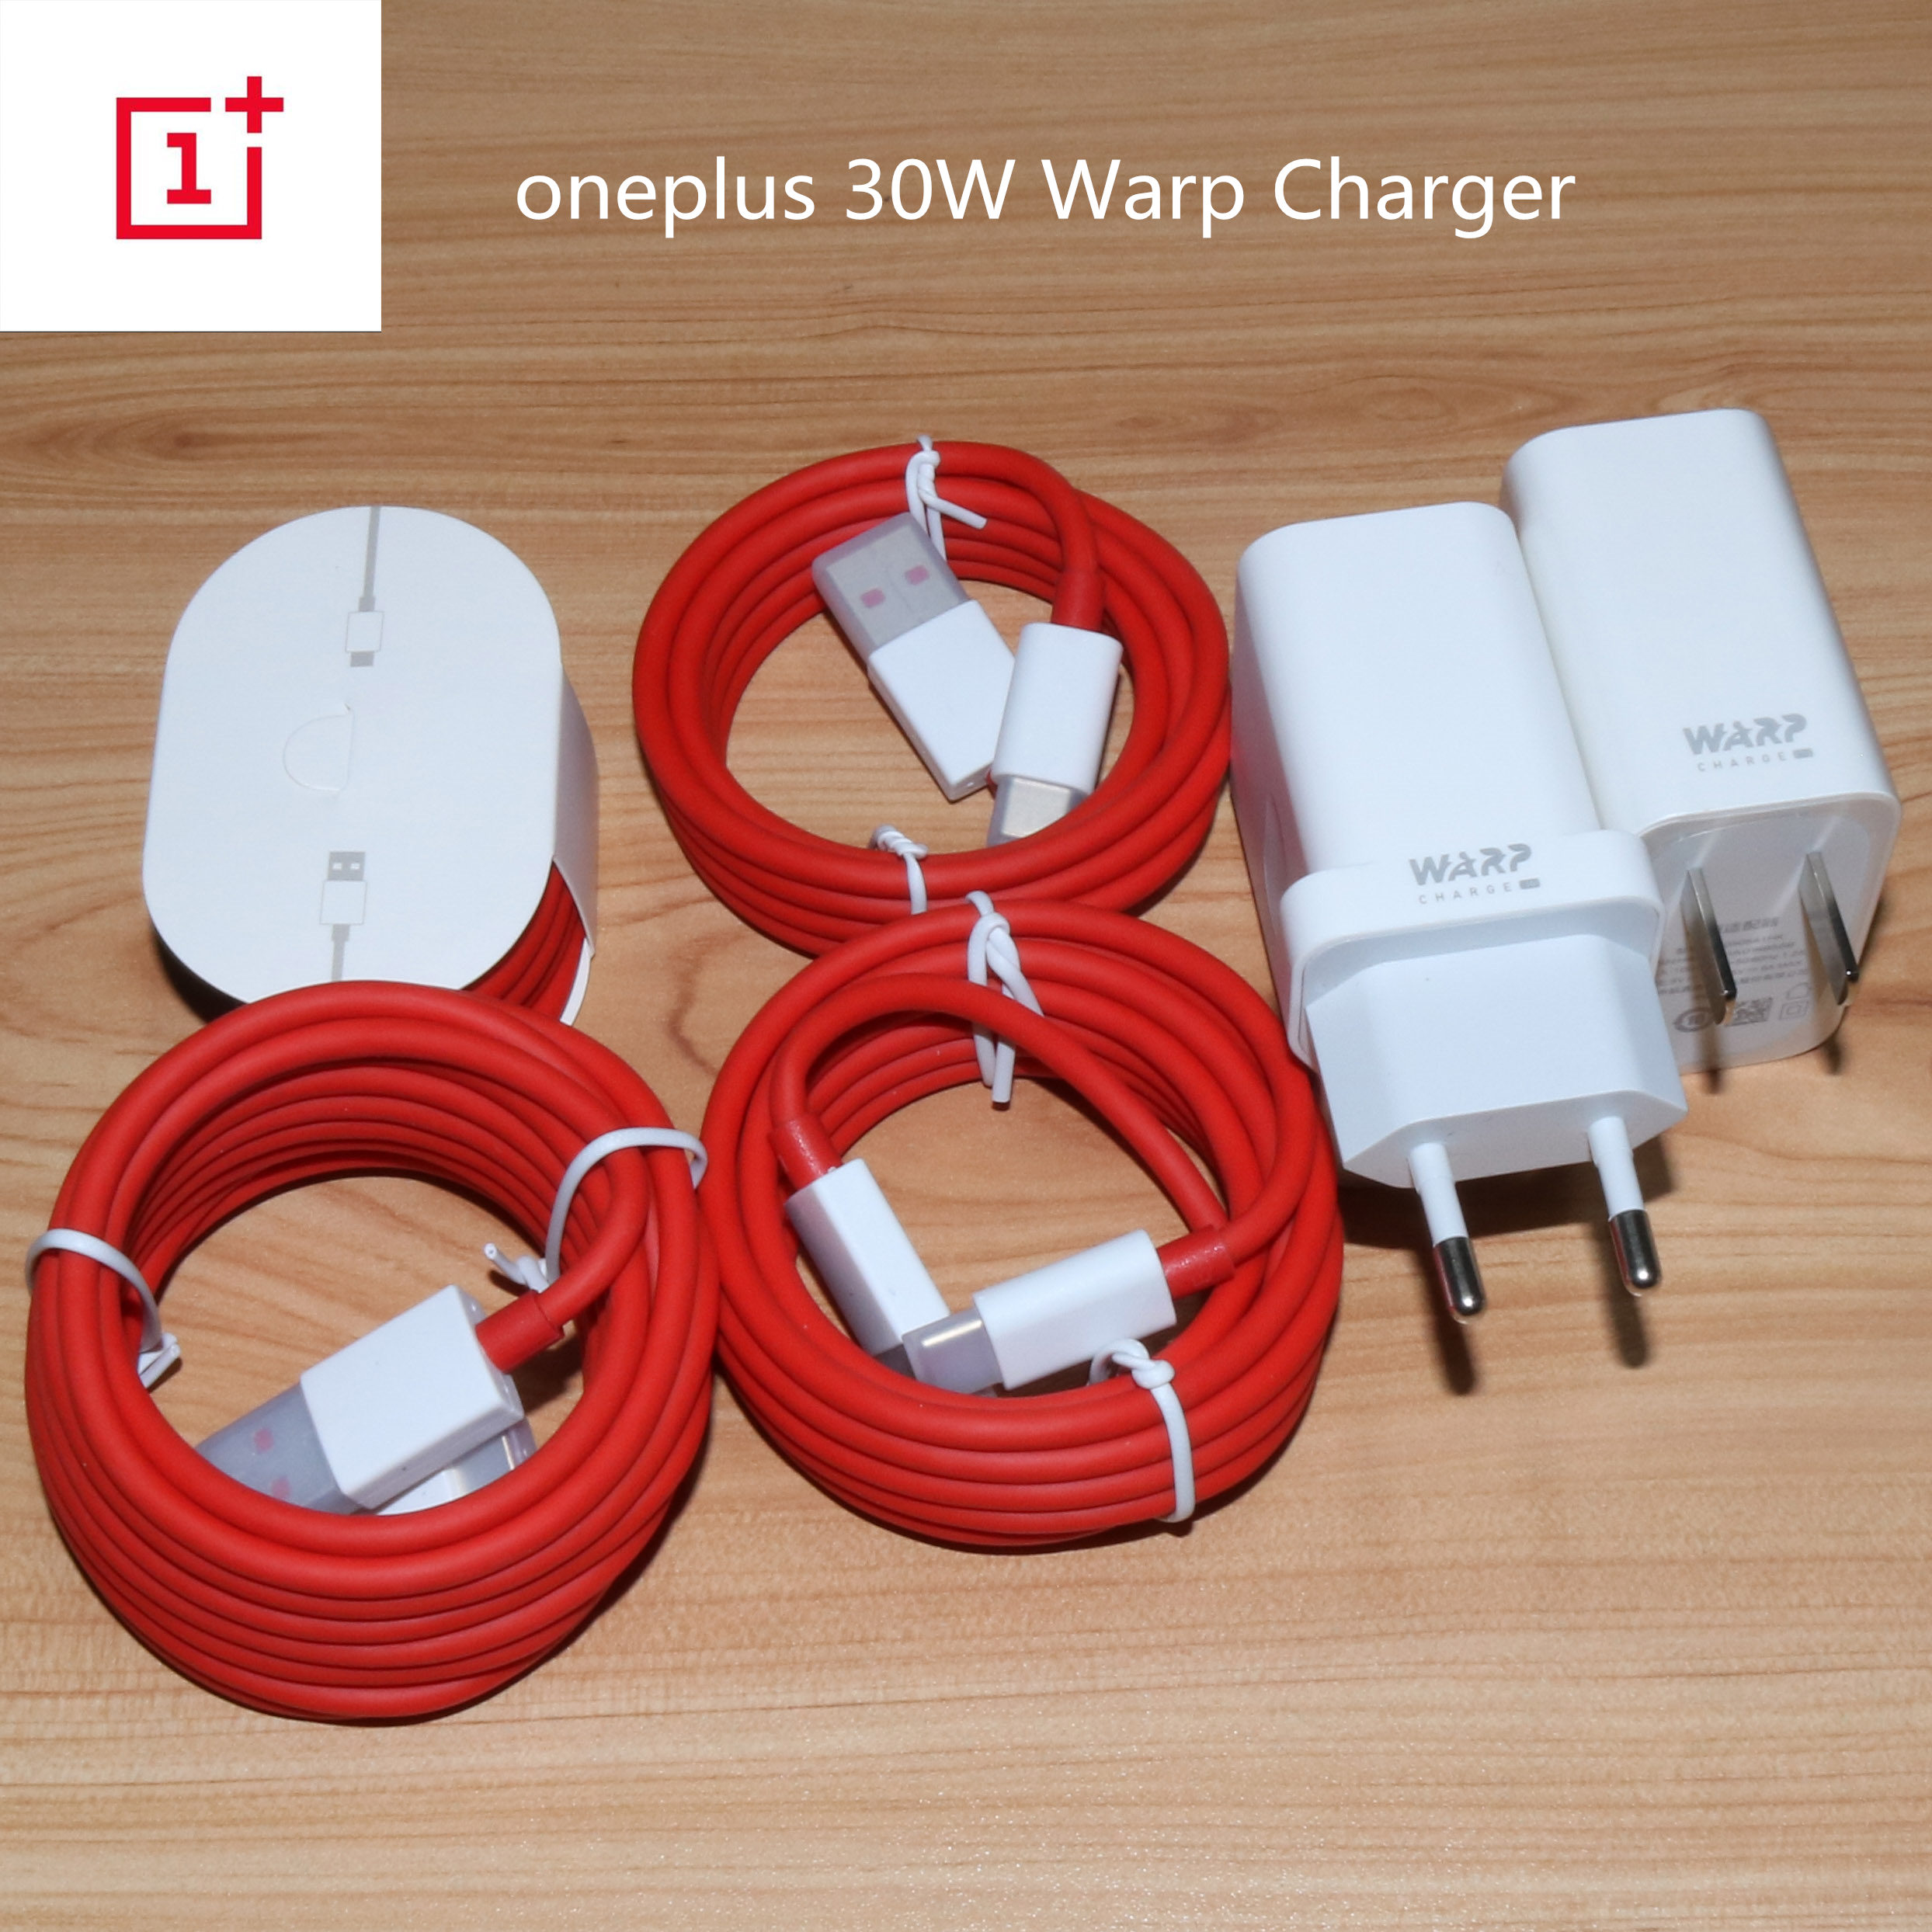 Original OnePlus 7T pro charger 30w Power Adapter One Plus 7 EU/US Warp Charge 5V/6A 30 Charger 6A USB Type c Cable - Price & Review | AliExpress Seller -